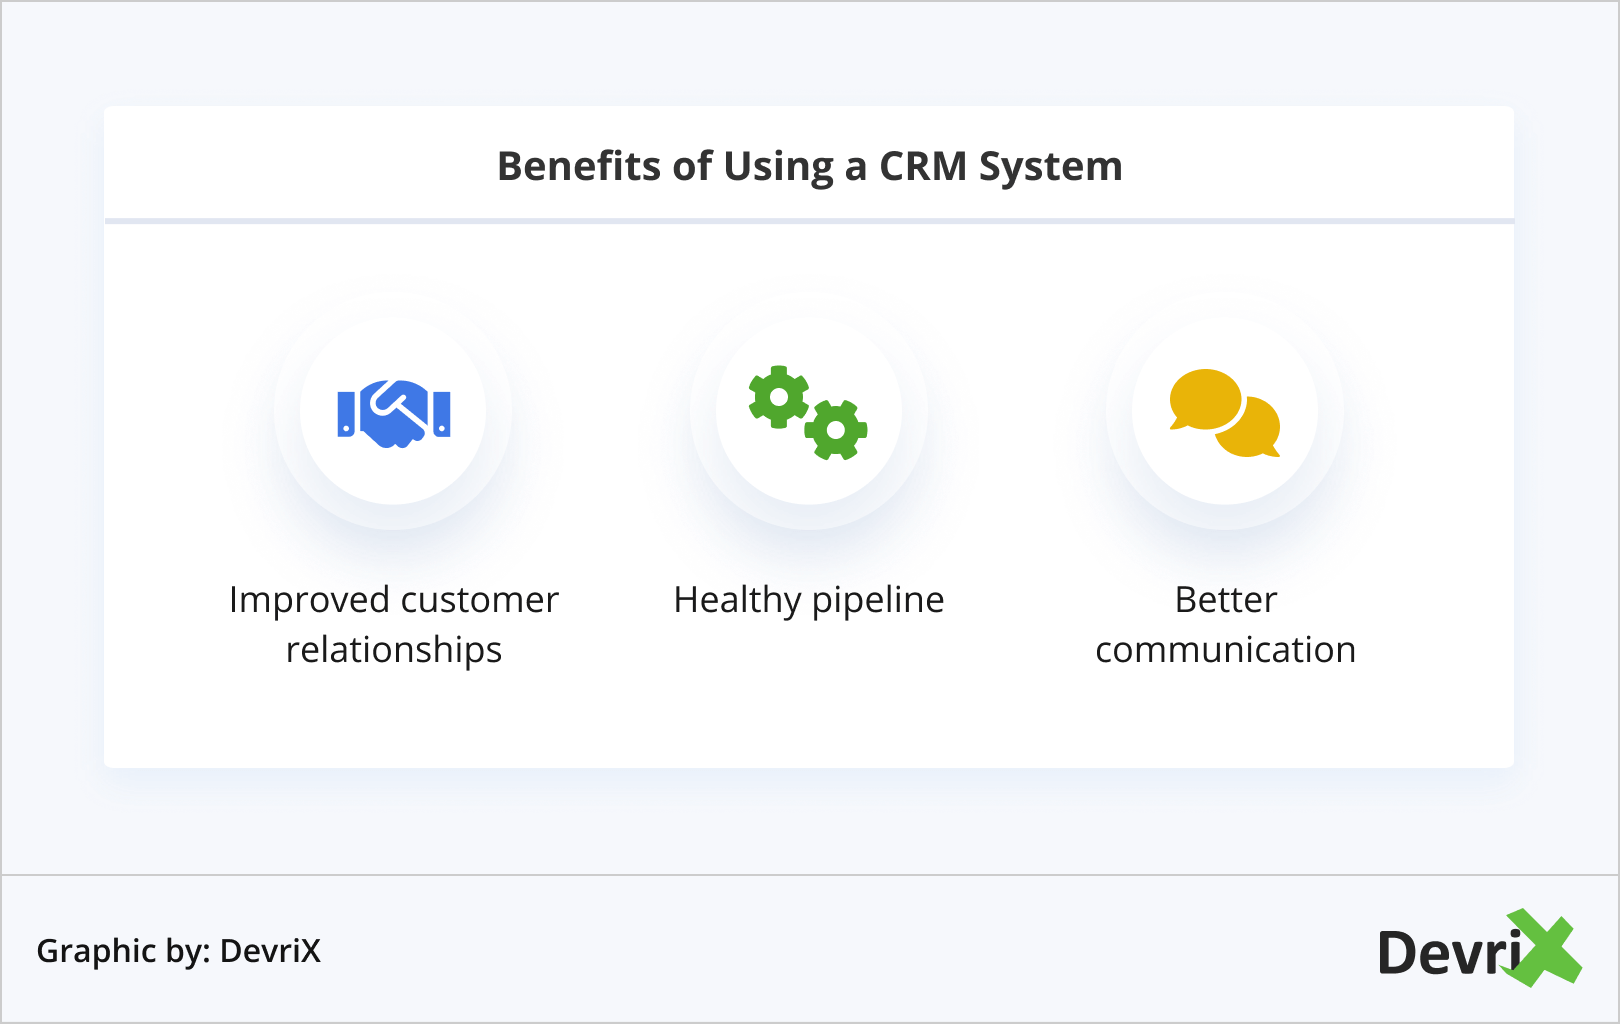 Benefits of Using a CRM System